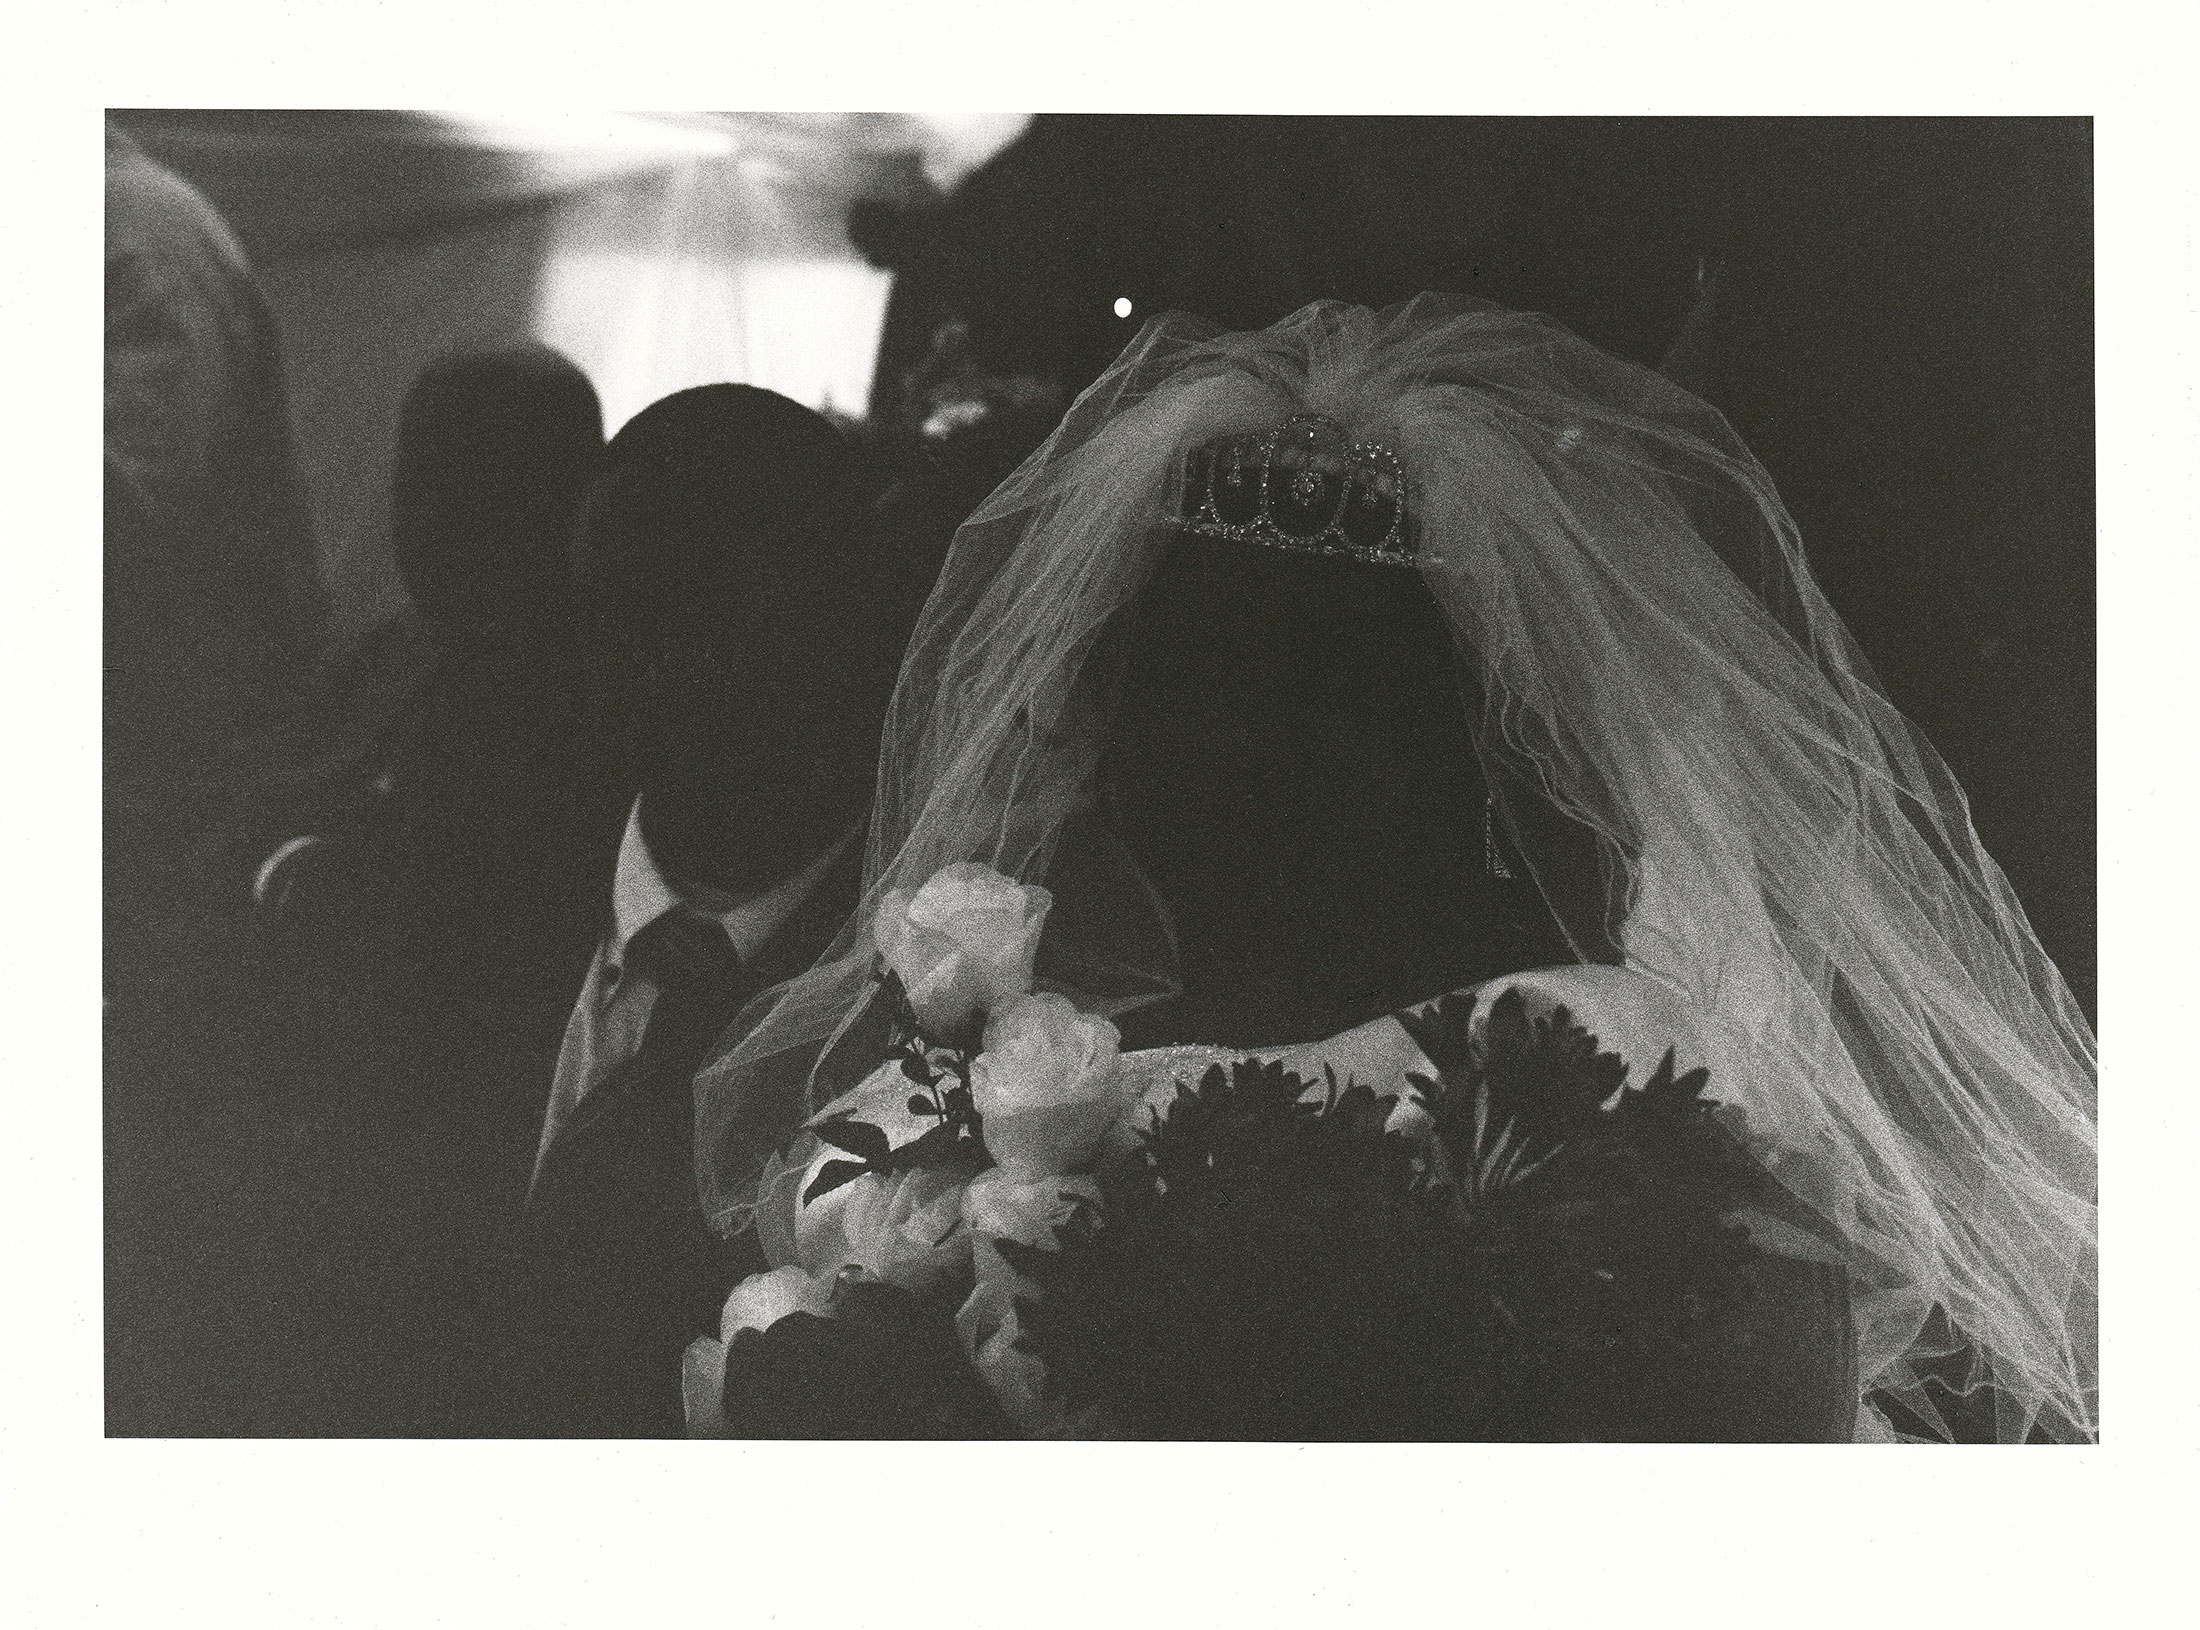 Sabelo Mlangeni’s ‘Absence of Identities’, a black and white photograph that depicts the shadowed faces of a bride and groom.
